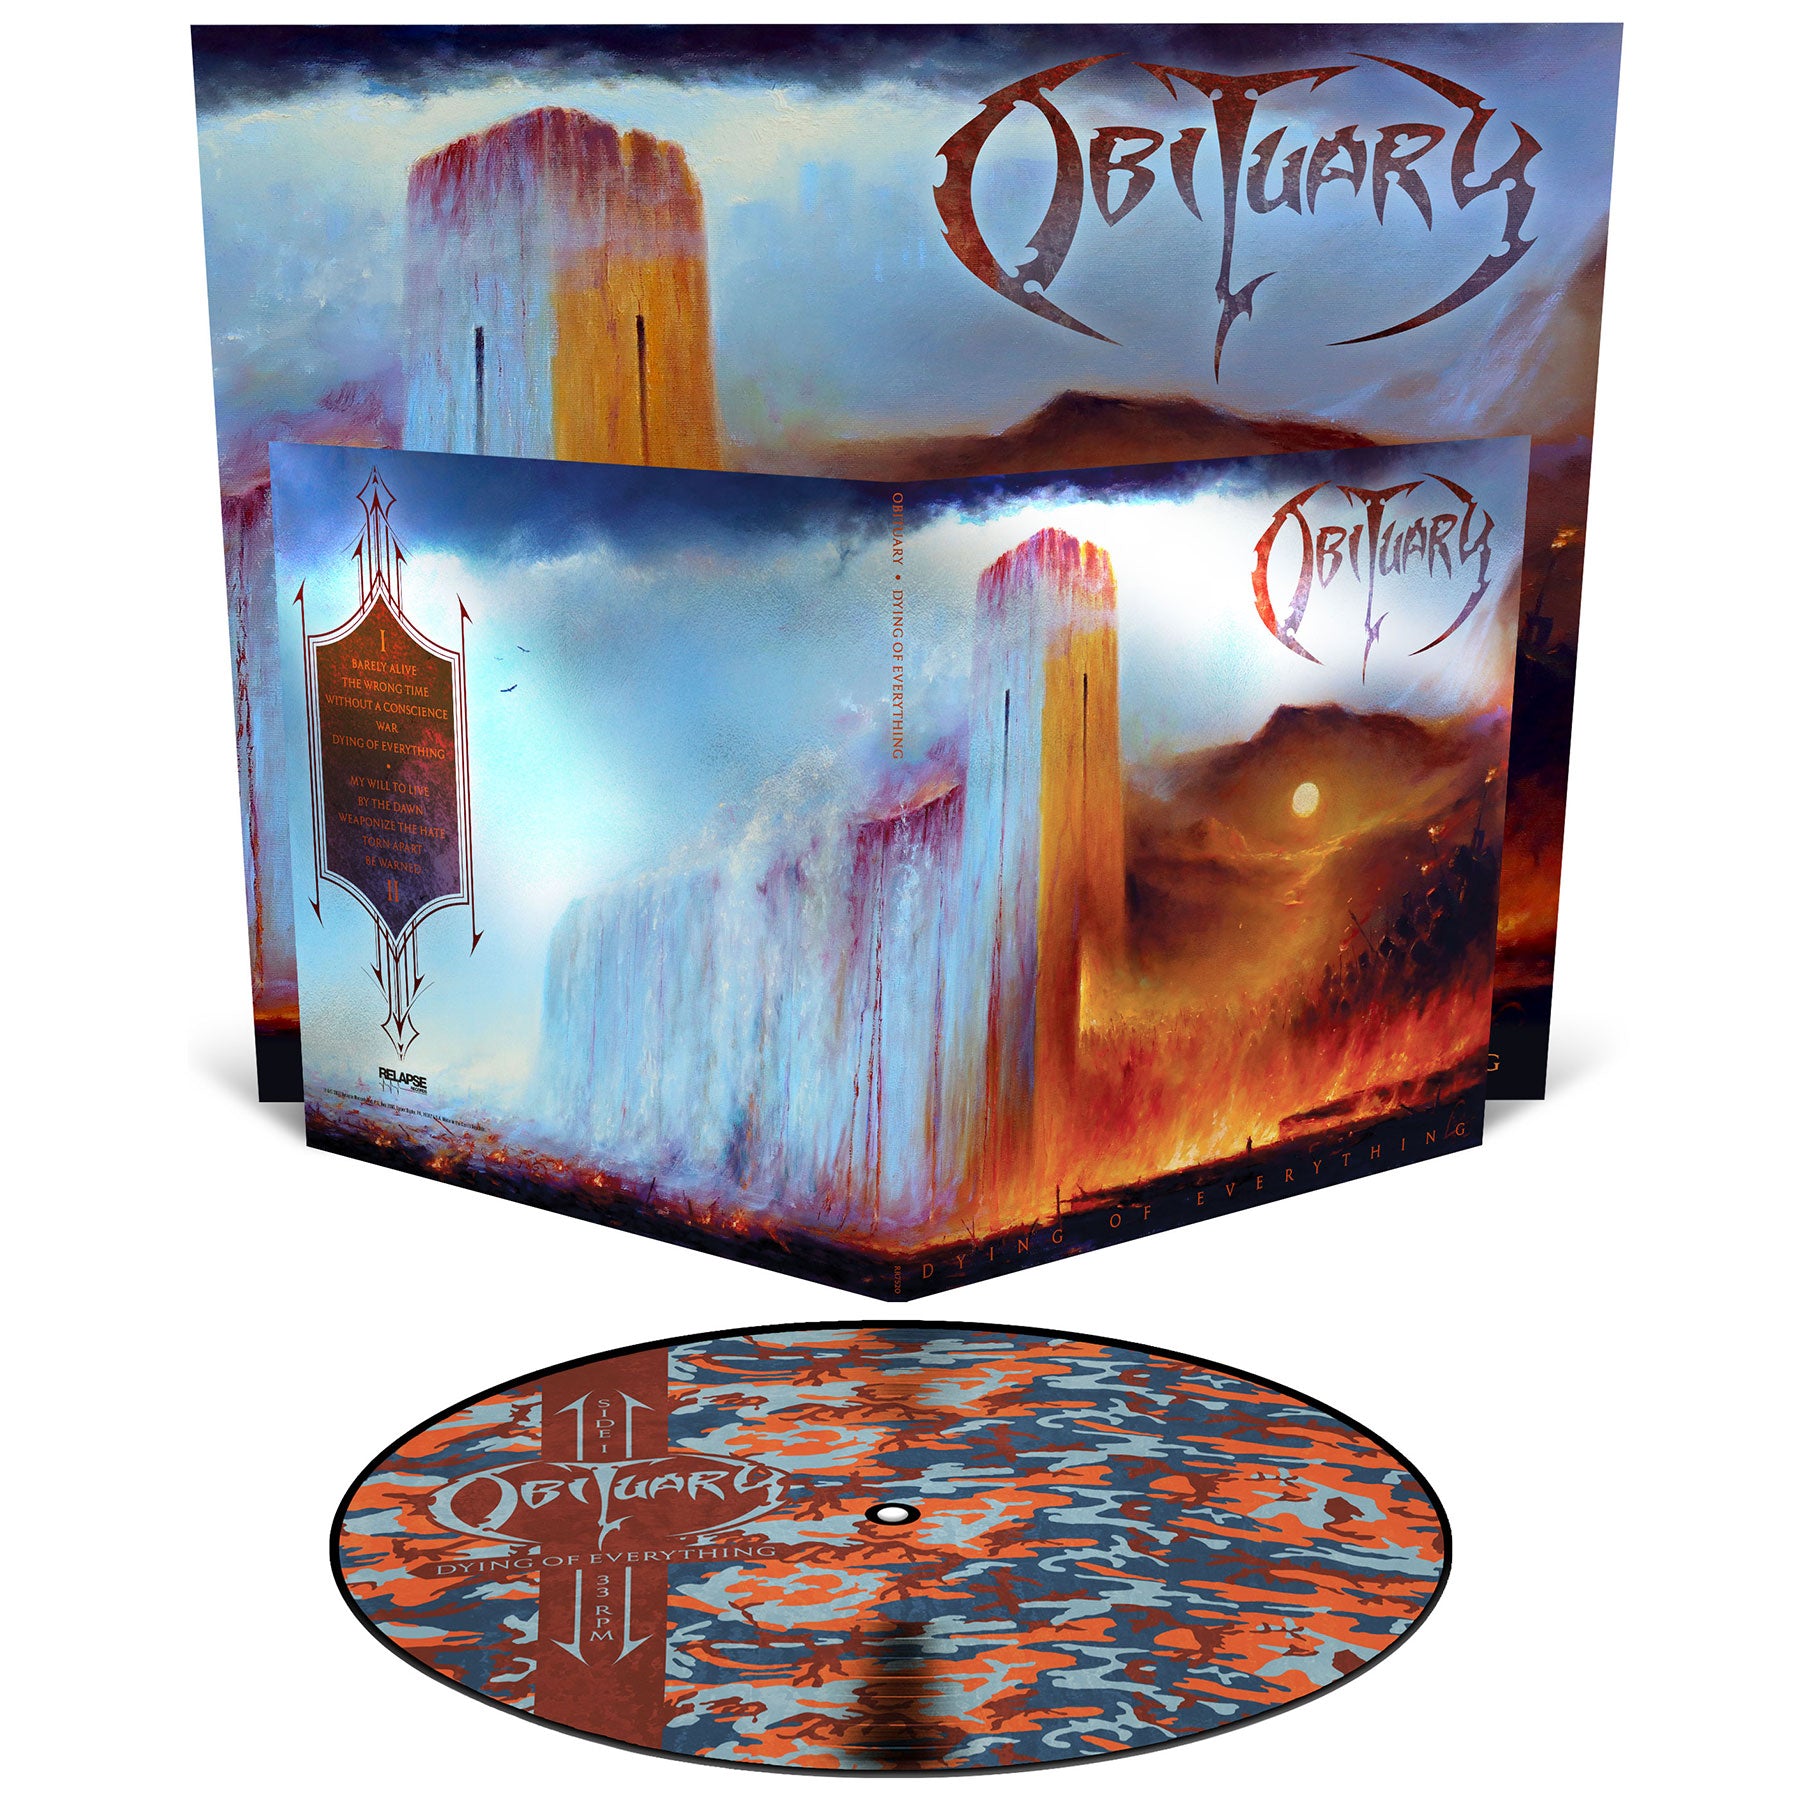 Obituary "Dying of Everything (Deluxe Edition)" 12"